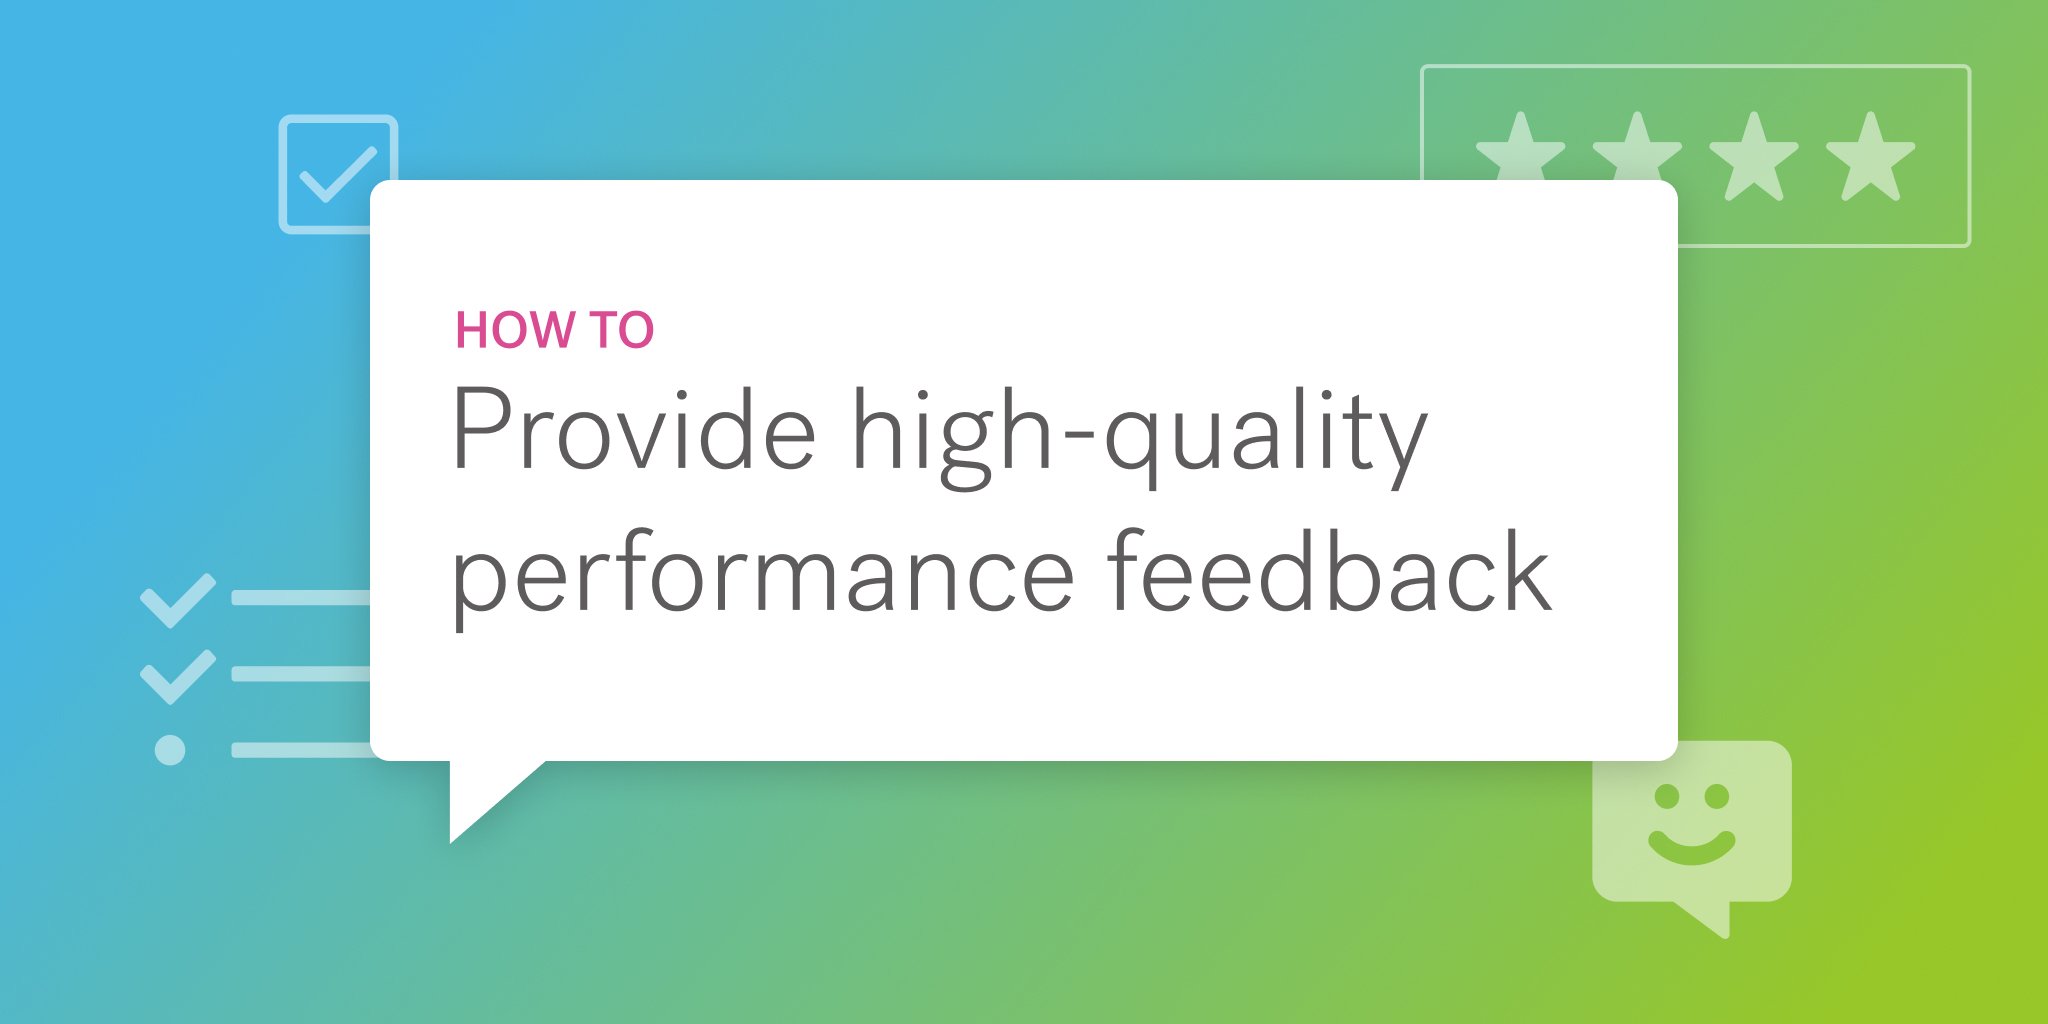 Graphic of "how to provide high-quality performance feedback" in a speech bubble on a blue green gradient background.